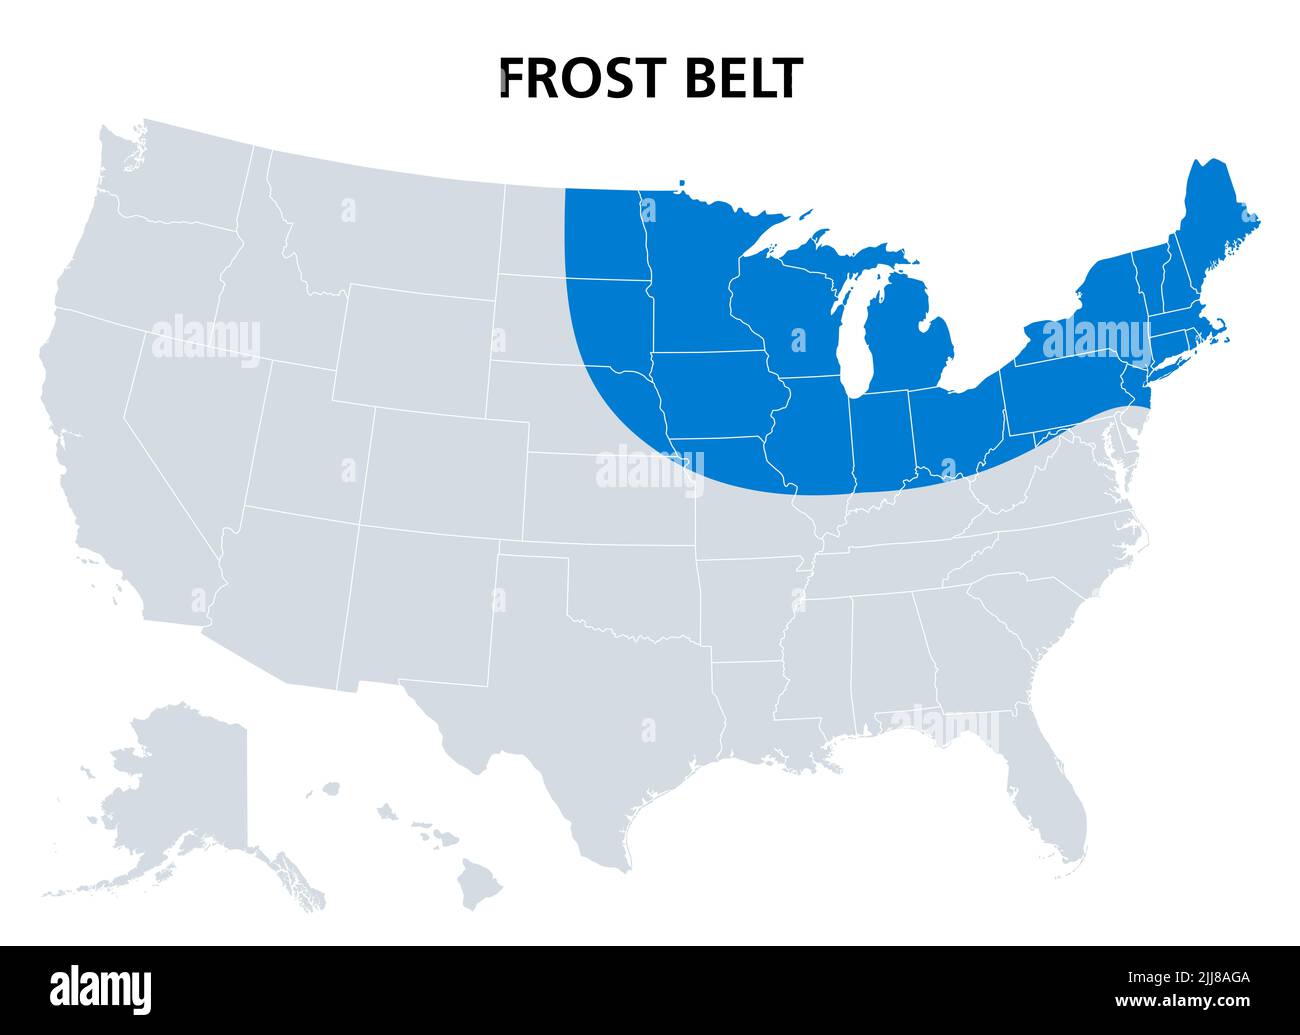 Frost Belt of the United States, political map. Region in the northeast, including the Great Lakes region and part of Upper Midwest. Stock Photo